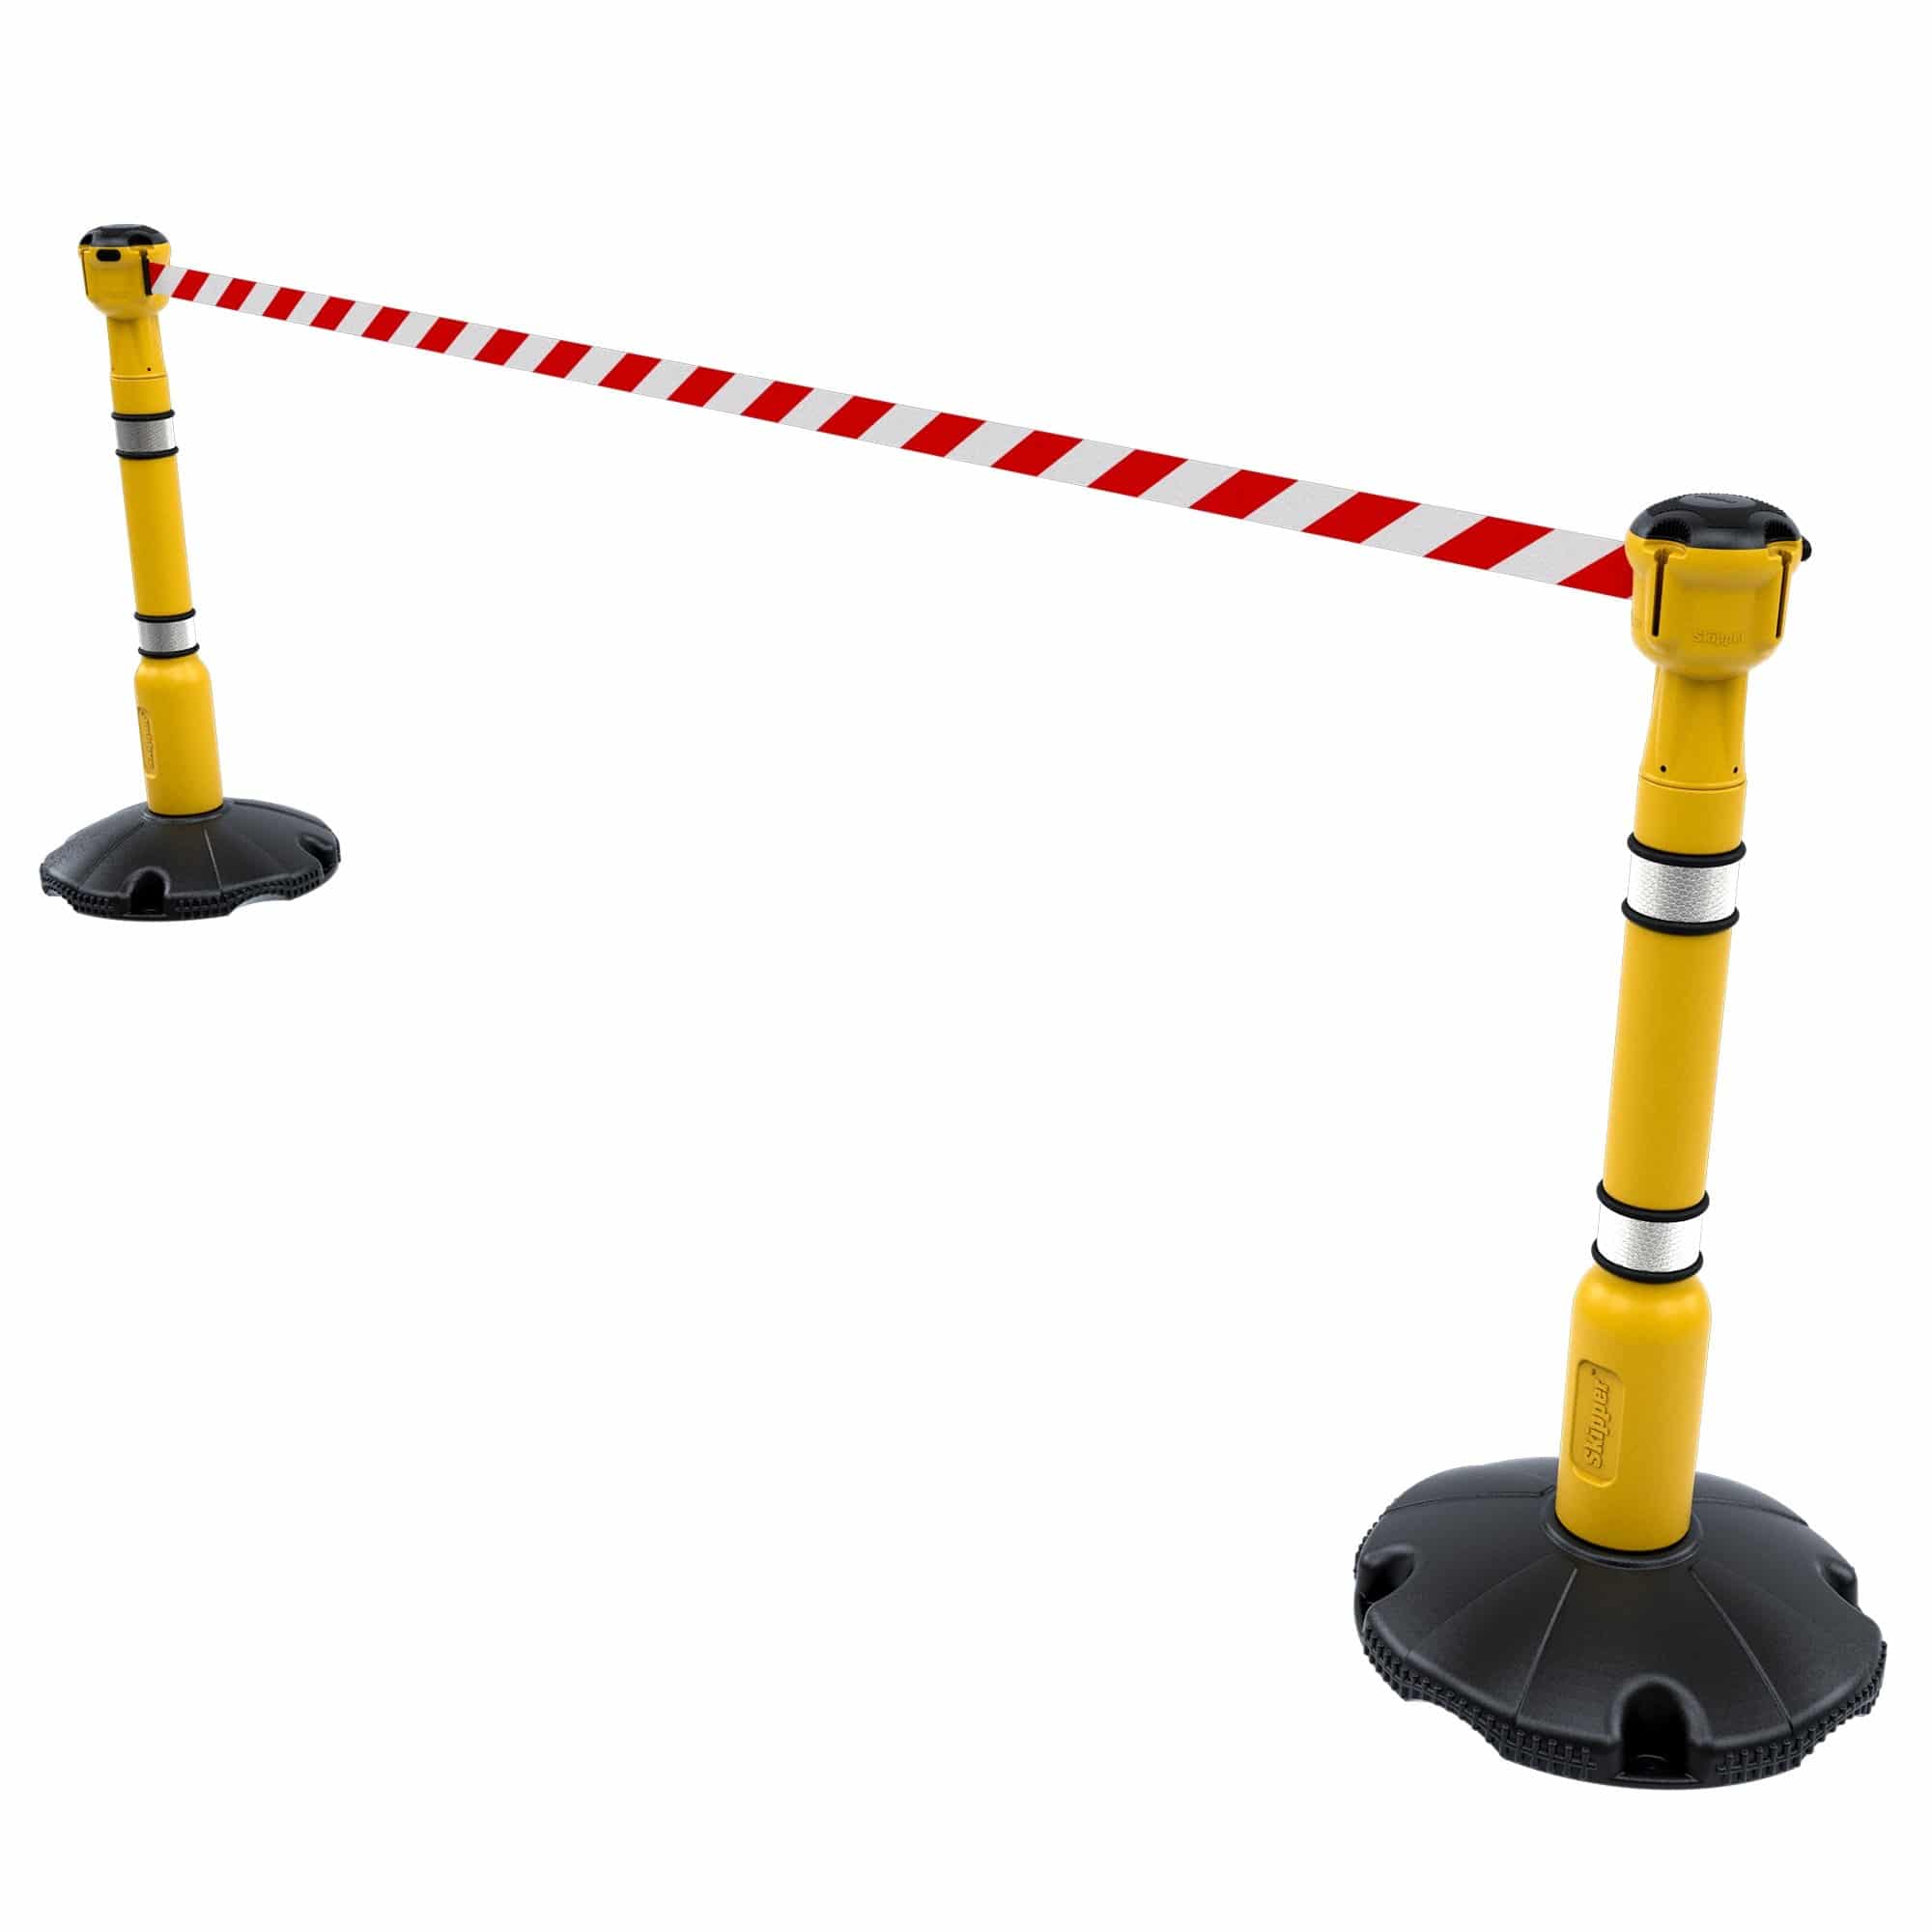 Skipper 9m Retractable Safety Barrier Complete Kit - Kit10 Retractable > Crowd Barrier > Tensa > Skipper One Stop For Safety Yellow Red & White Chevron 